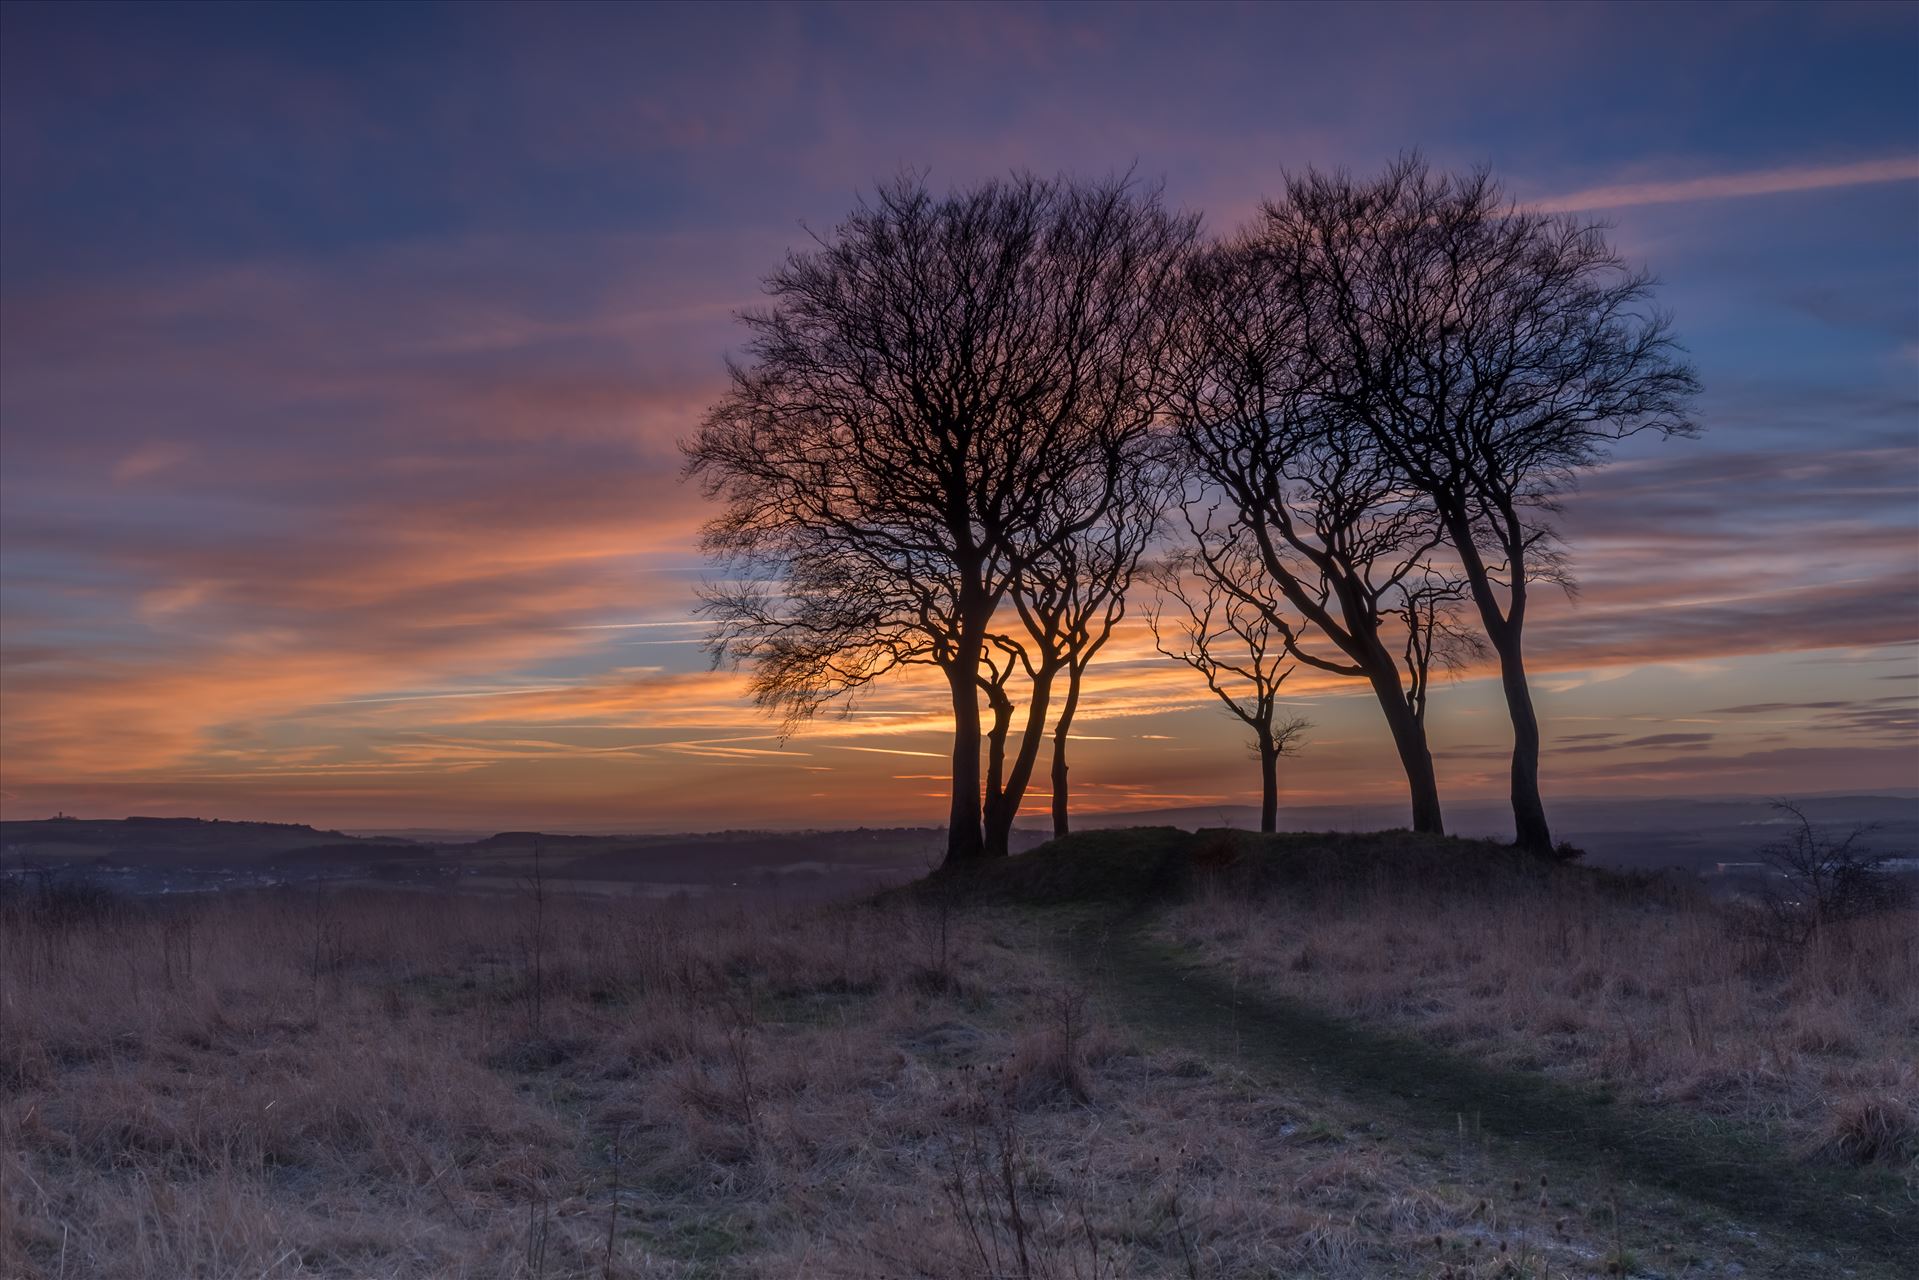 Sunset at Copt Hill - Copt Hill is an ancient burial ground near Houghton-le-Spring. The site is marked by six trees. Presumably there used to be a seventh tree, as they are known as the Seven Sisters. by philreay